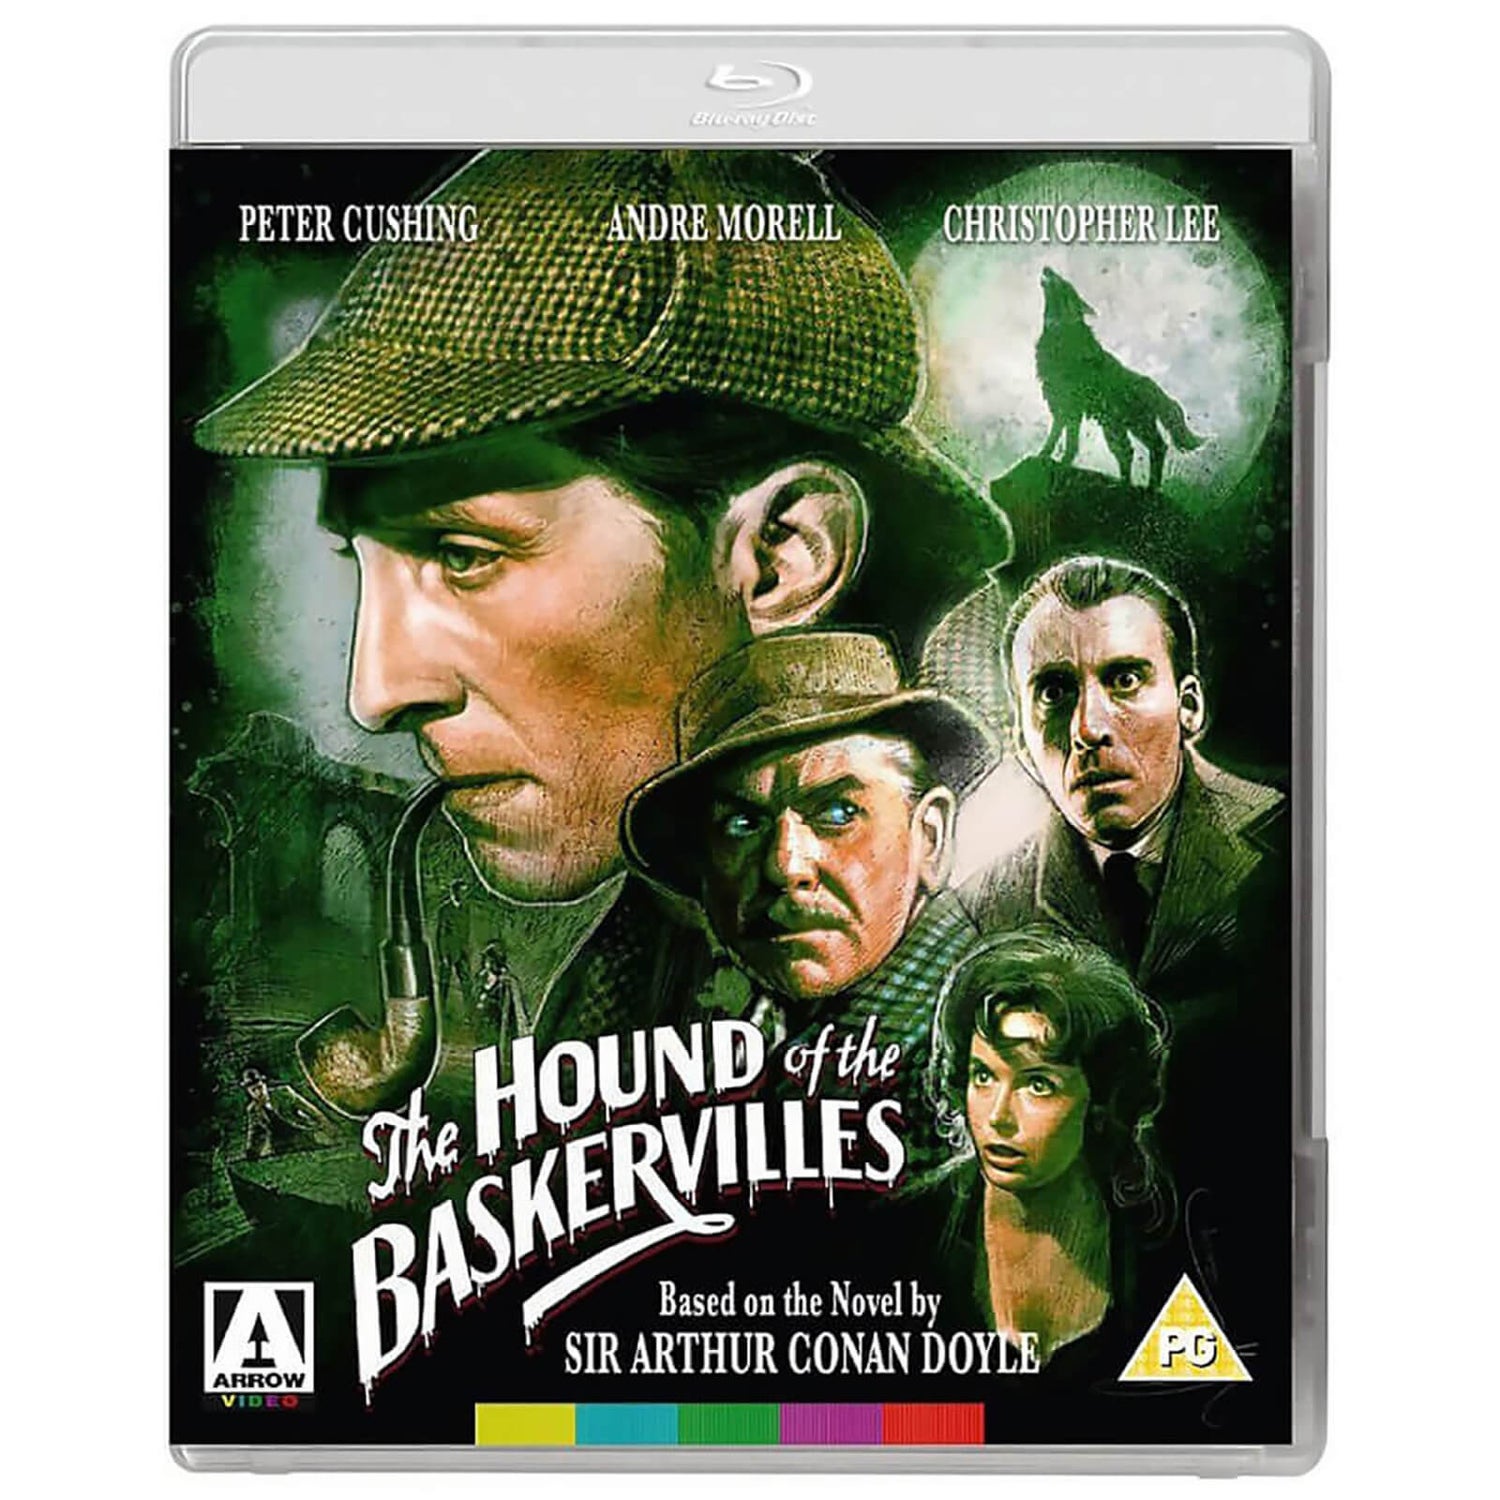 The Hound Of The Baskervilles Blu-ray